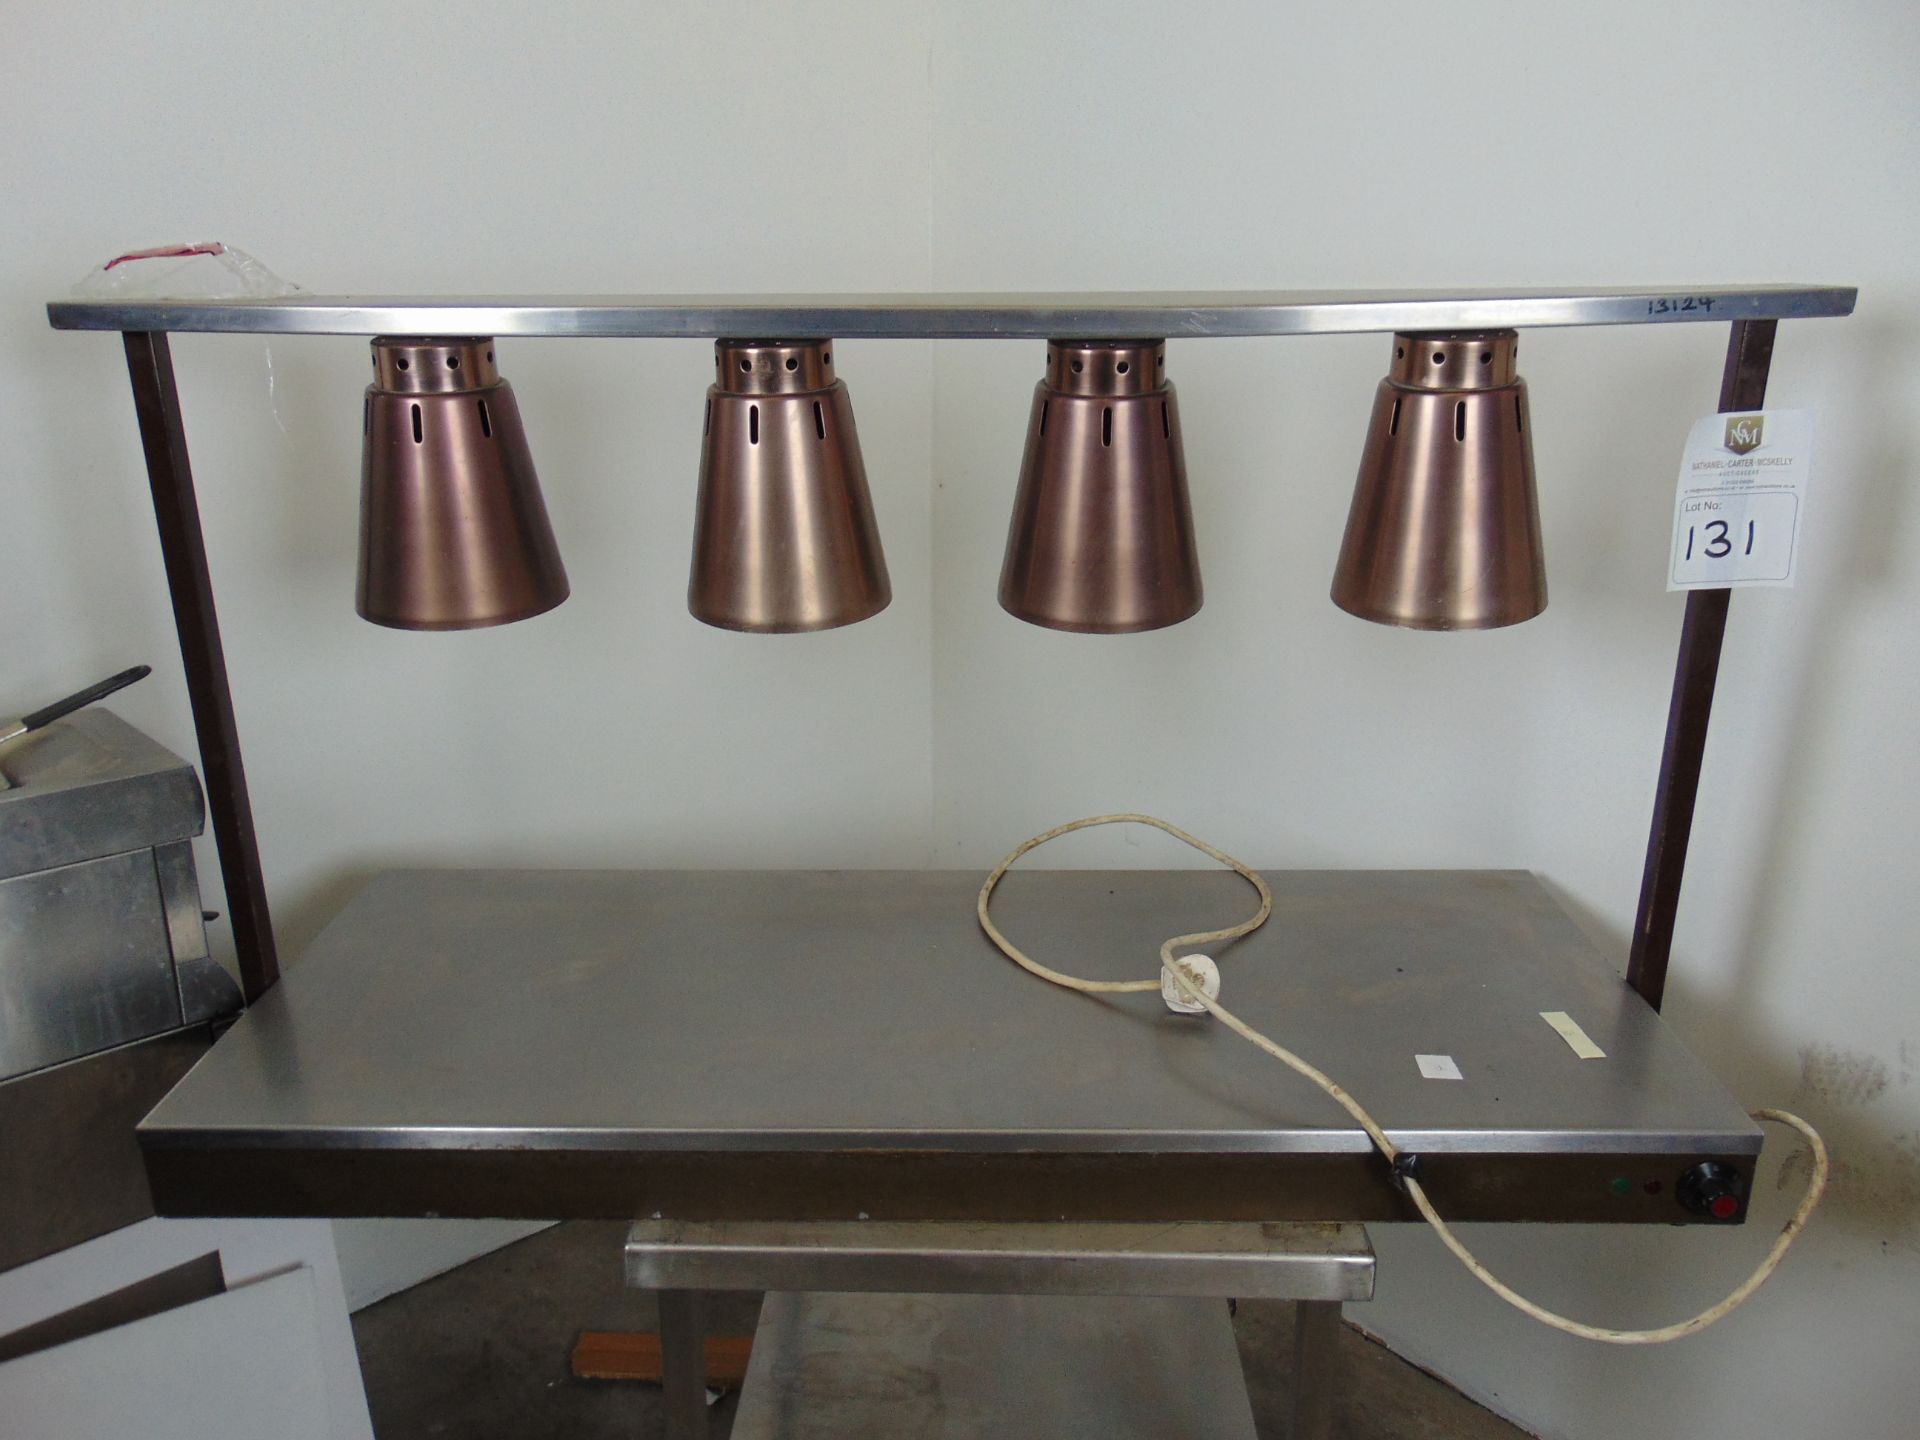 4 Lamp Hot Counter with 3 pin plug